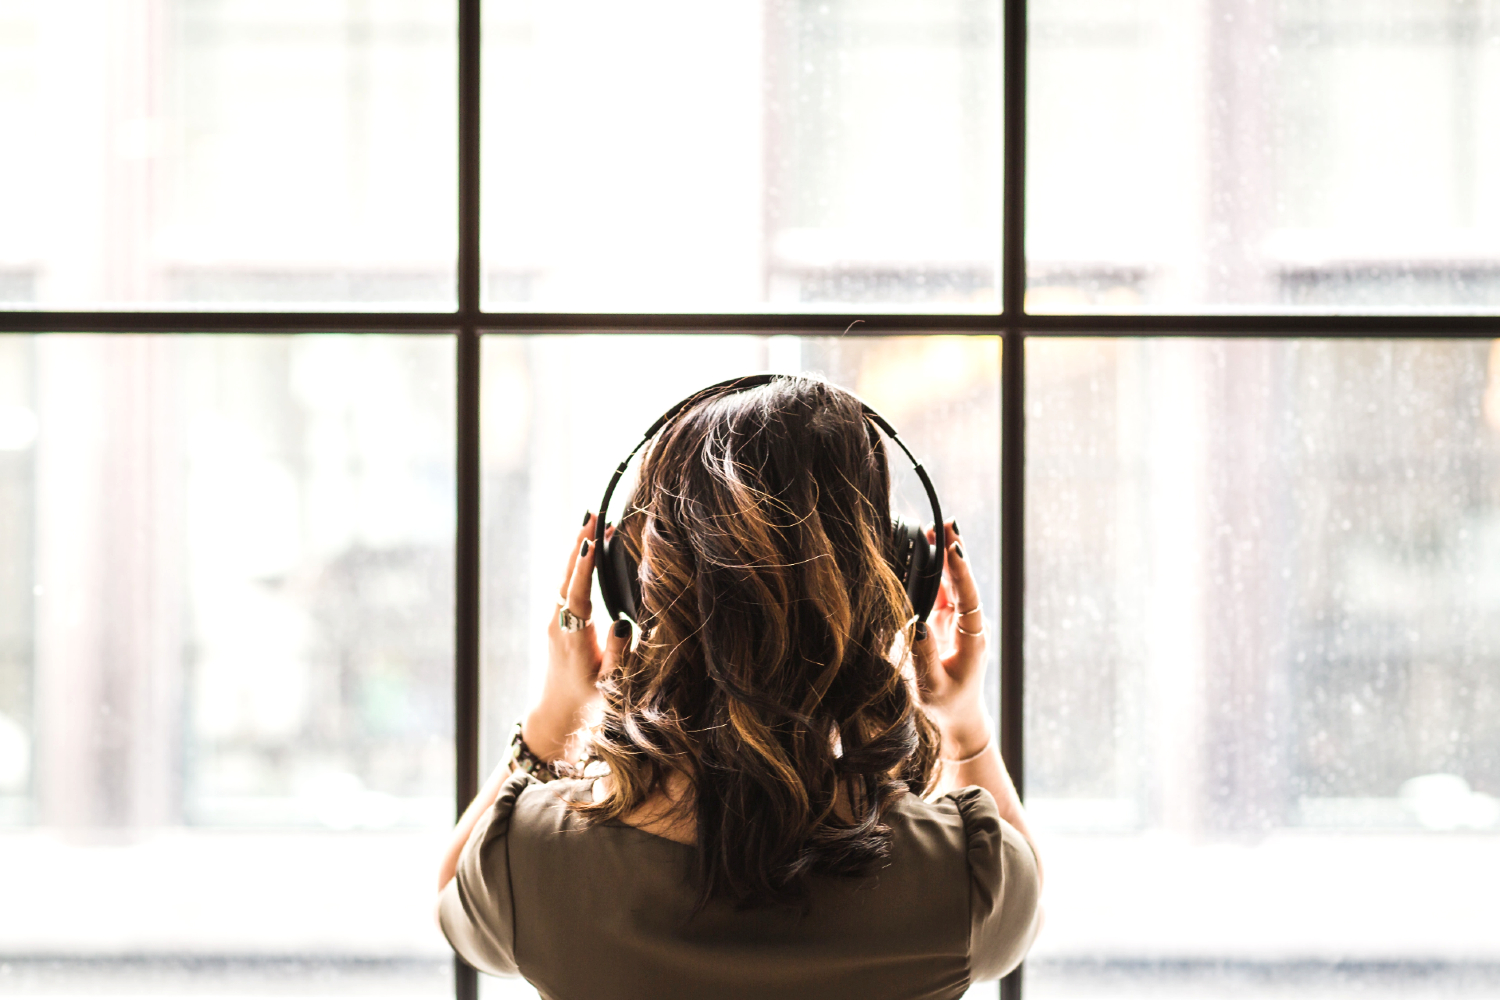 Travel podcasts to fuel your wanderlust from home